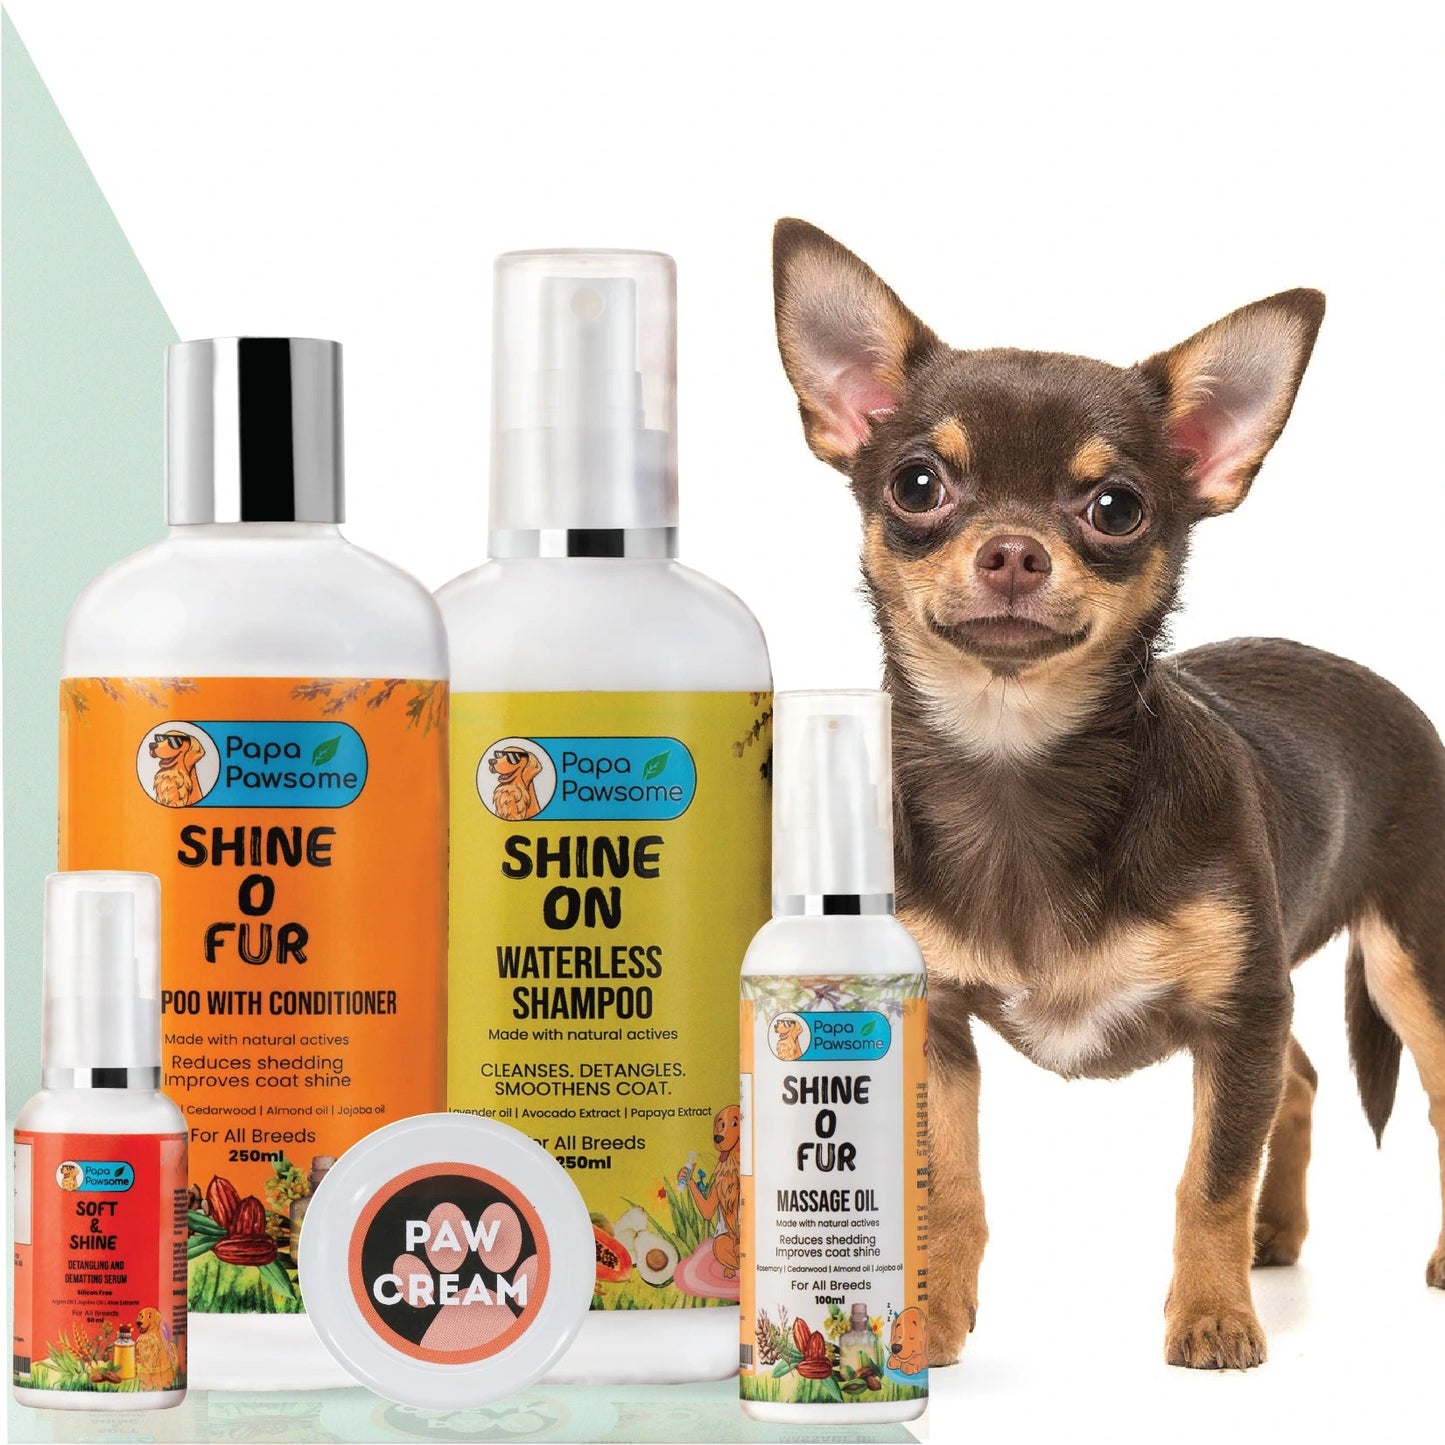 Chihuahua Complete Grooming kit - Papa Pawsome